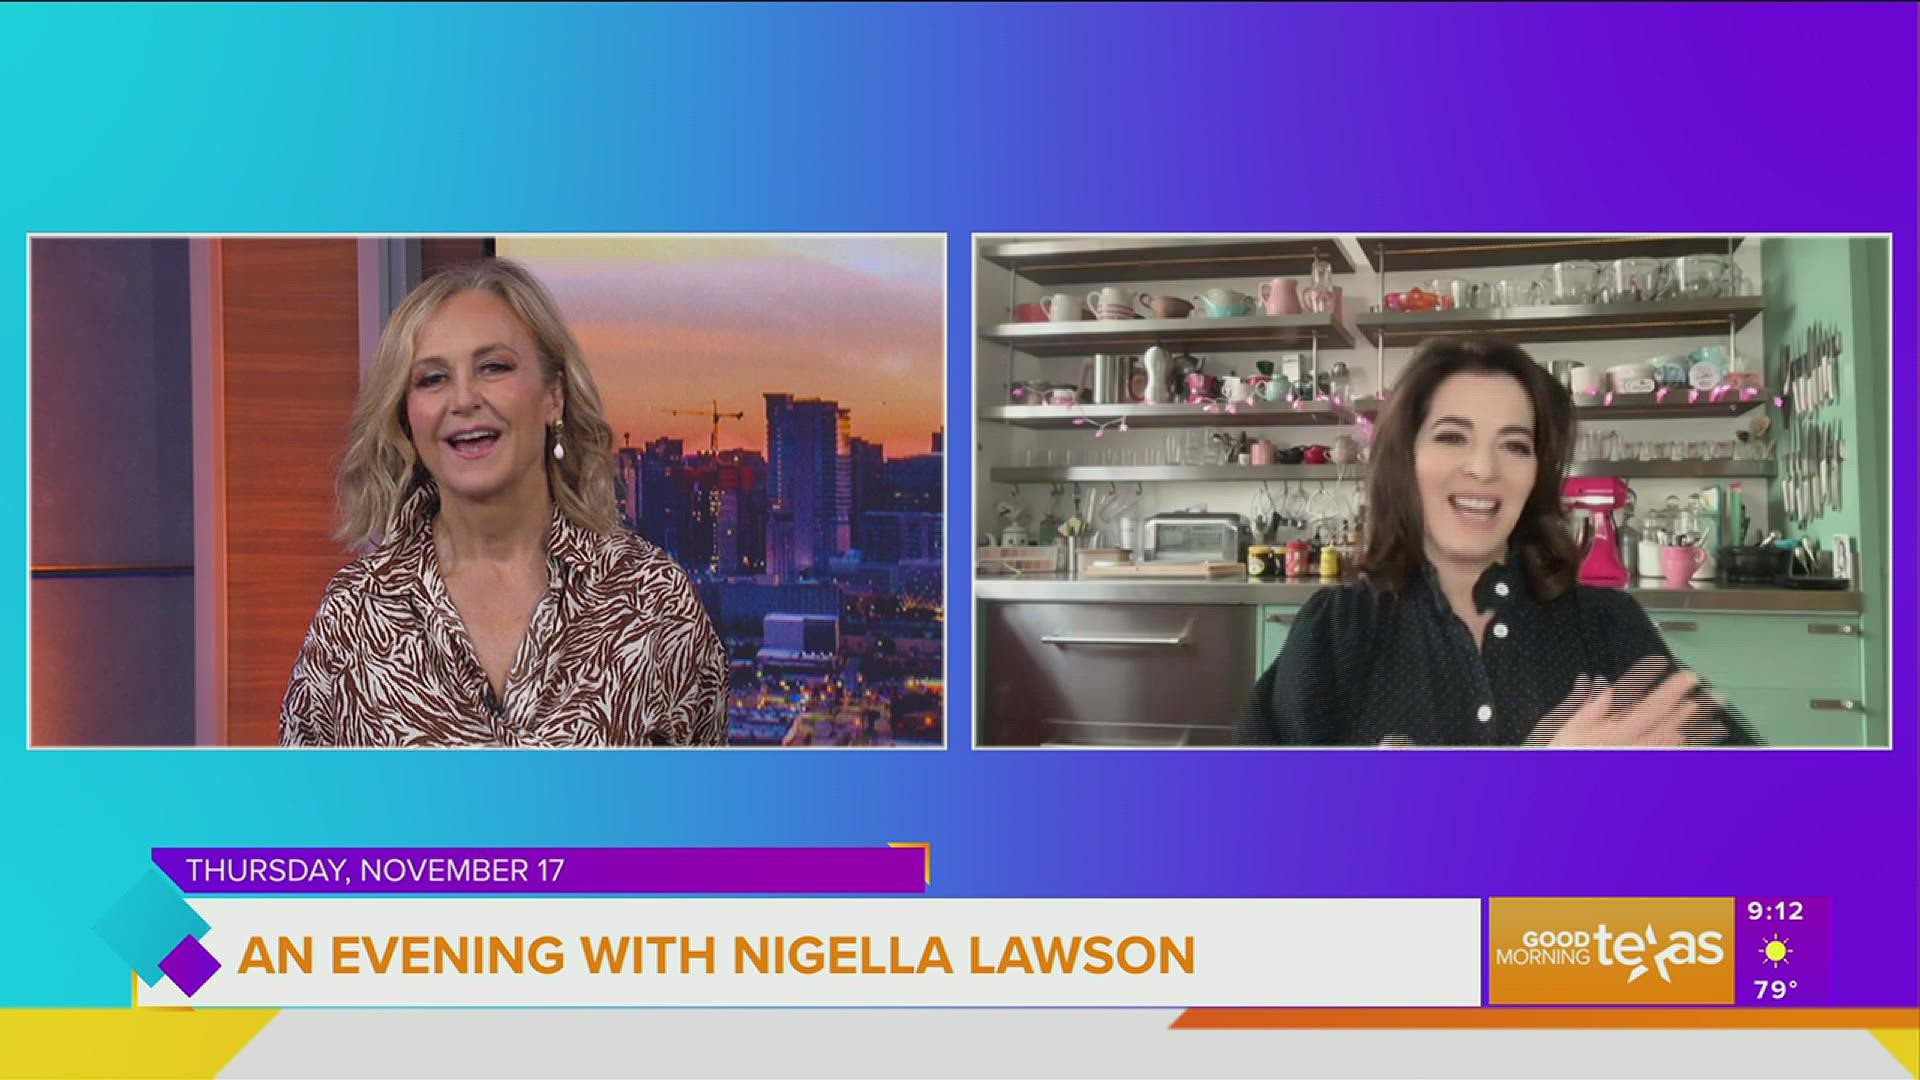 Nigella has a new book out and she's coming to Dallas where Jane will interview her as part of the DMA arts and letters live series.